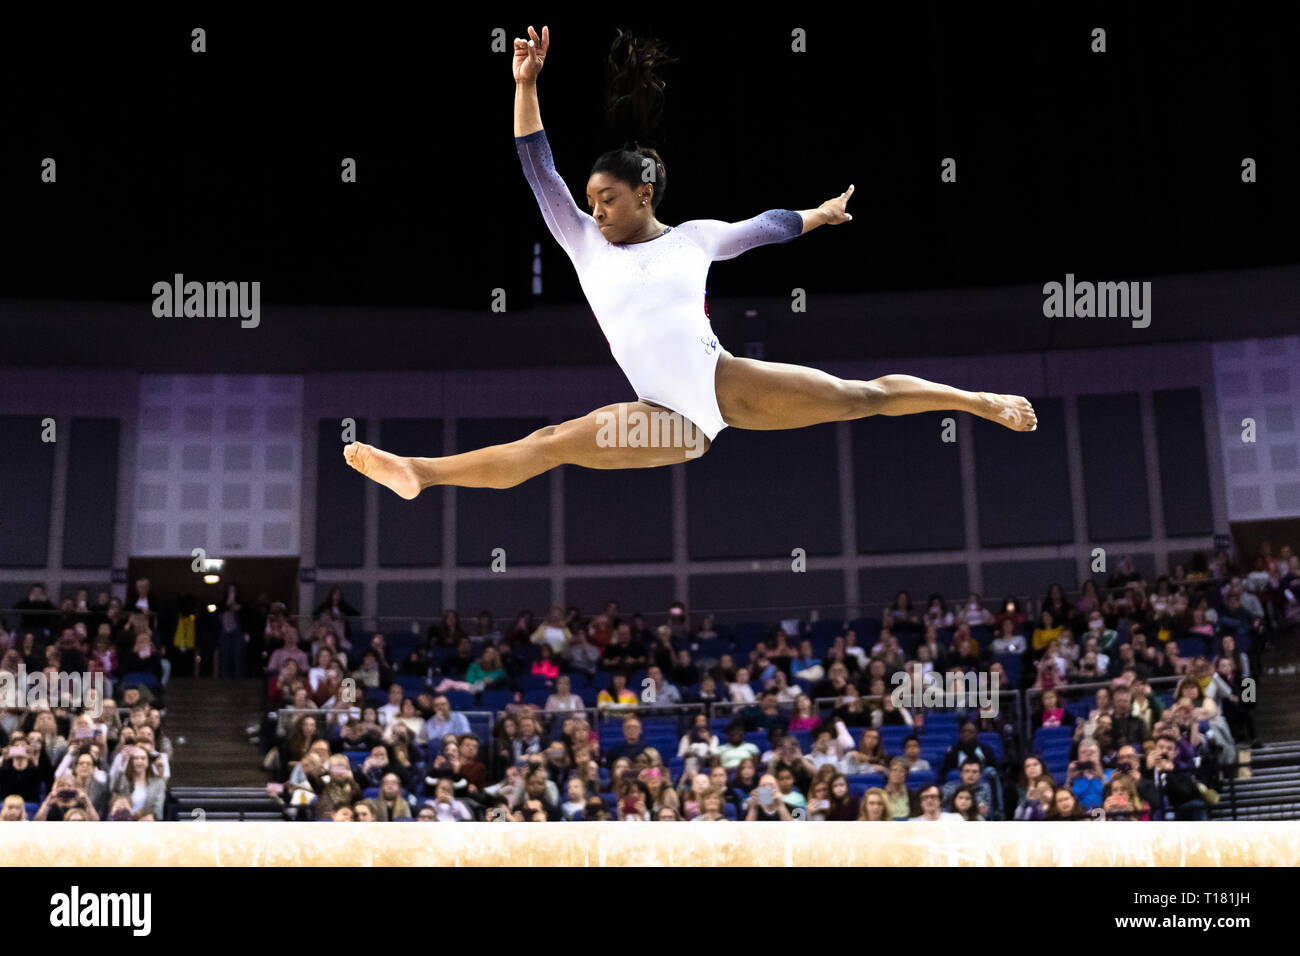 London, UK. 23rd Mar, 2019. Simon Biles performs on the beam during the Matchroom Multisport presents the 2019 Superstars of Gymnastics at The O2 Arena on Saturday, 23 March 2019. LONDON ENGLAND. Credit: Taka Wu/Alamy Live News Stock Photo